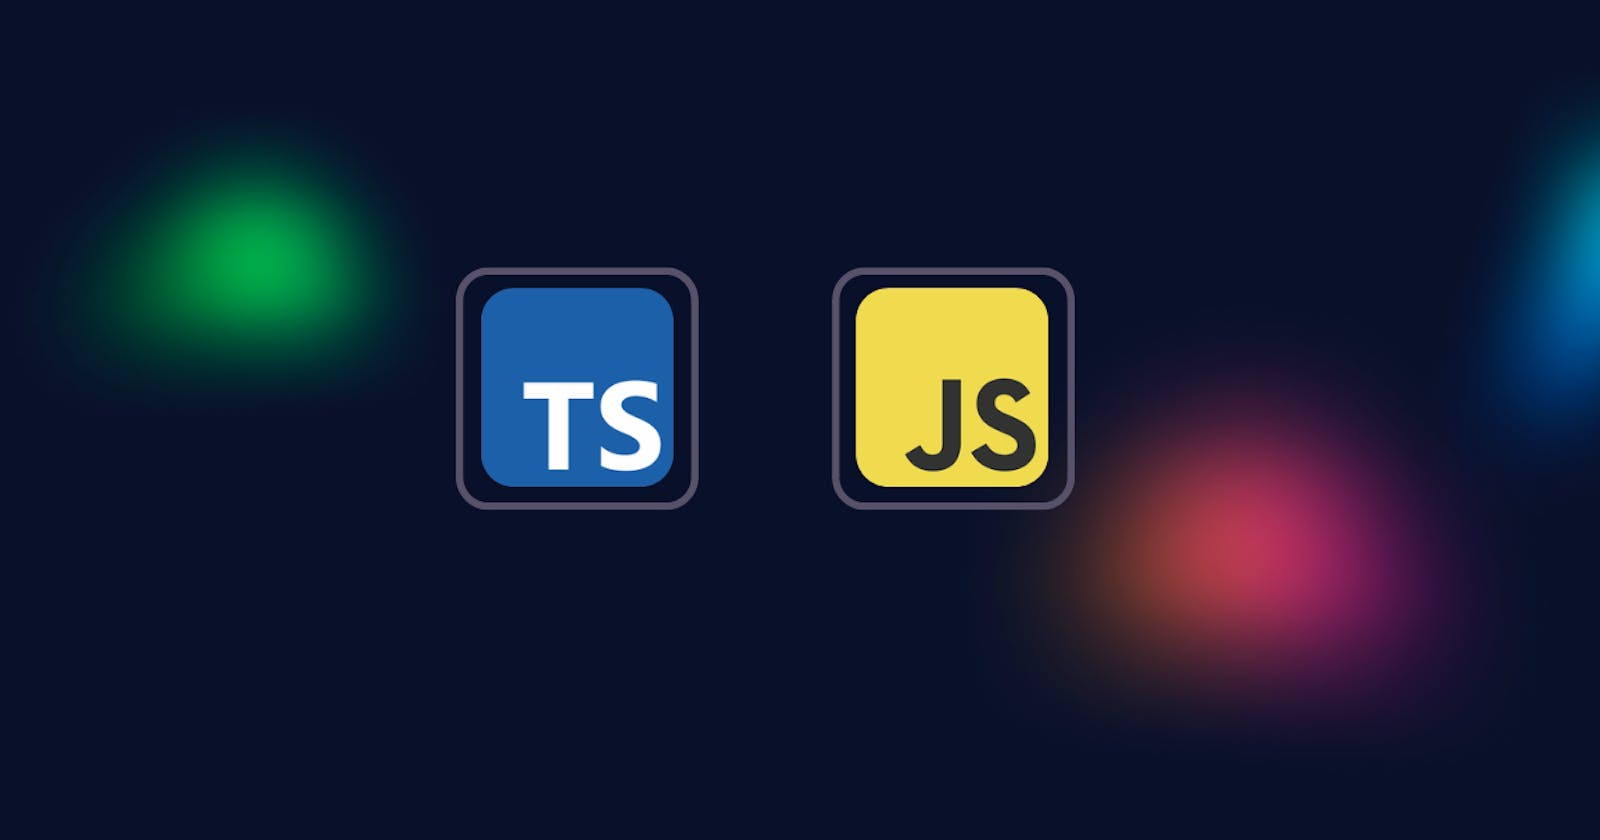 TypeScript vs. JavaScript: which to use for web scraping?